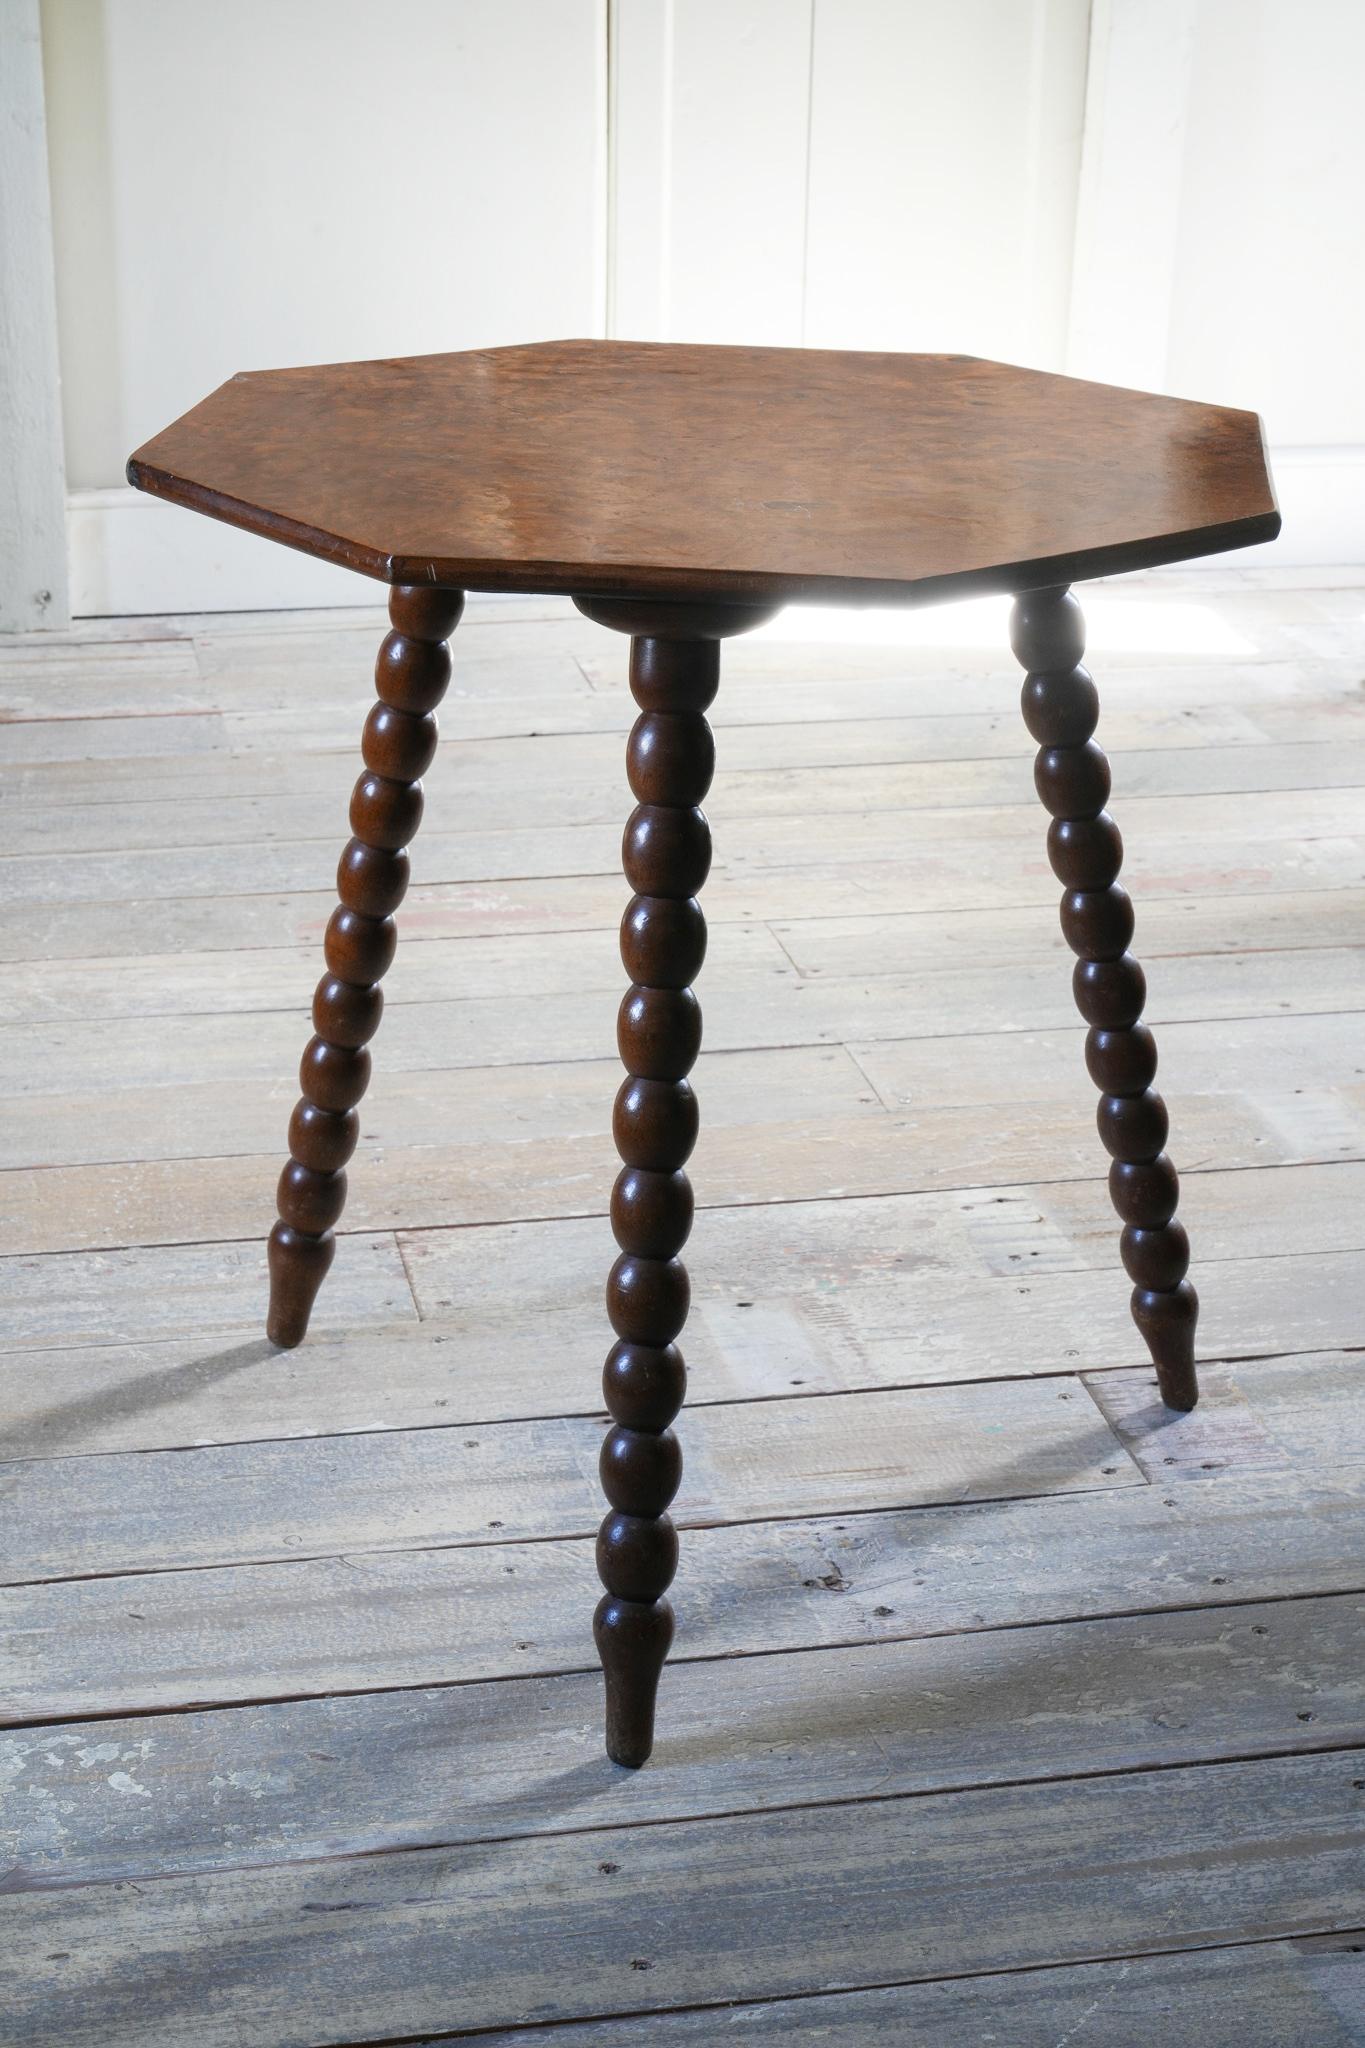 The octagonal top in well figured walnut, supported on bobbin turned mahogany legs.